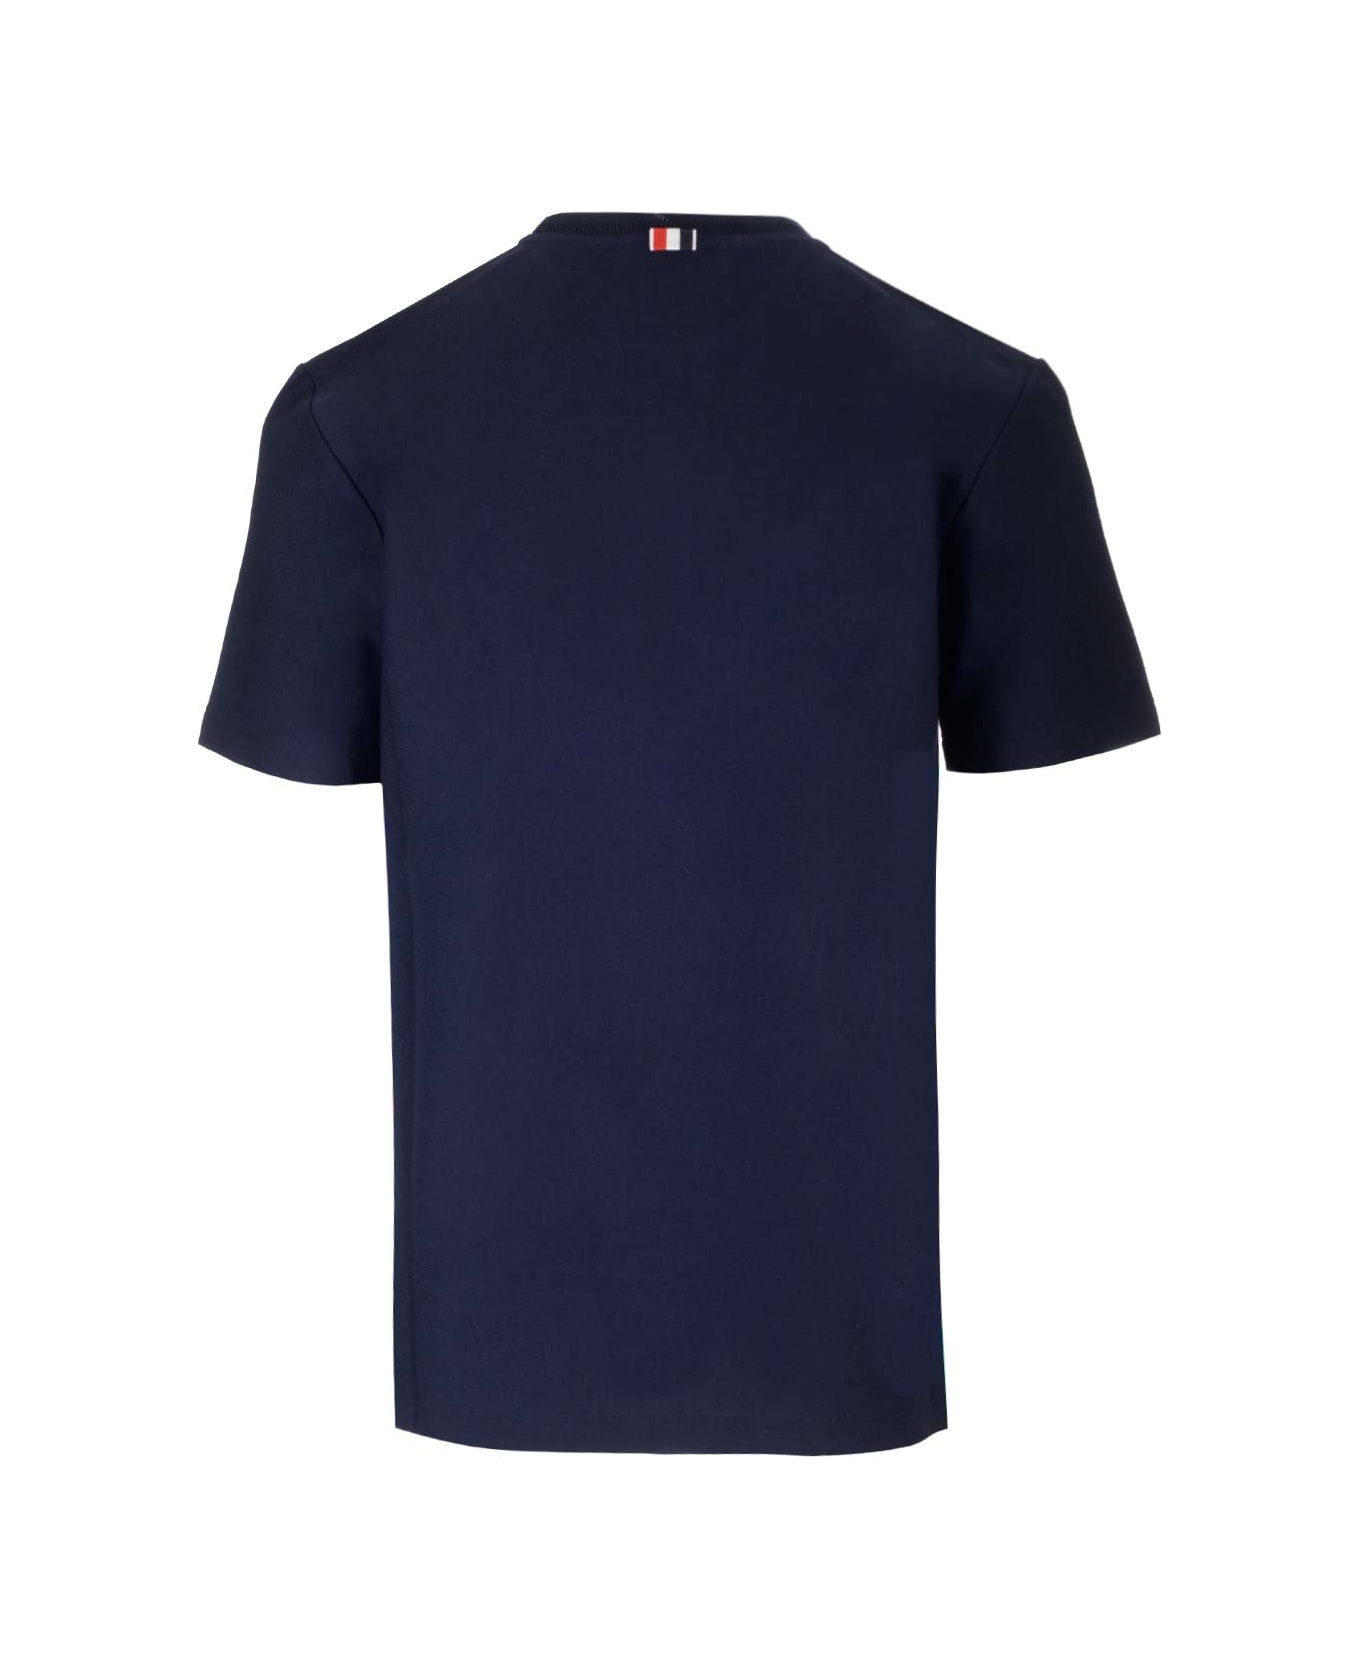 Thom Browne T-shirt With Striped Band - BLUE